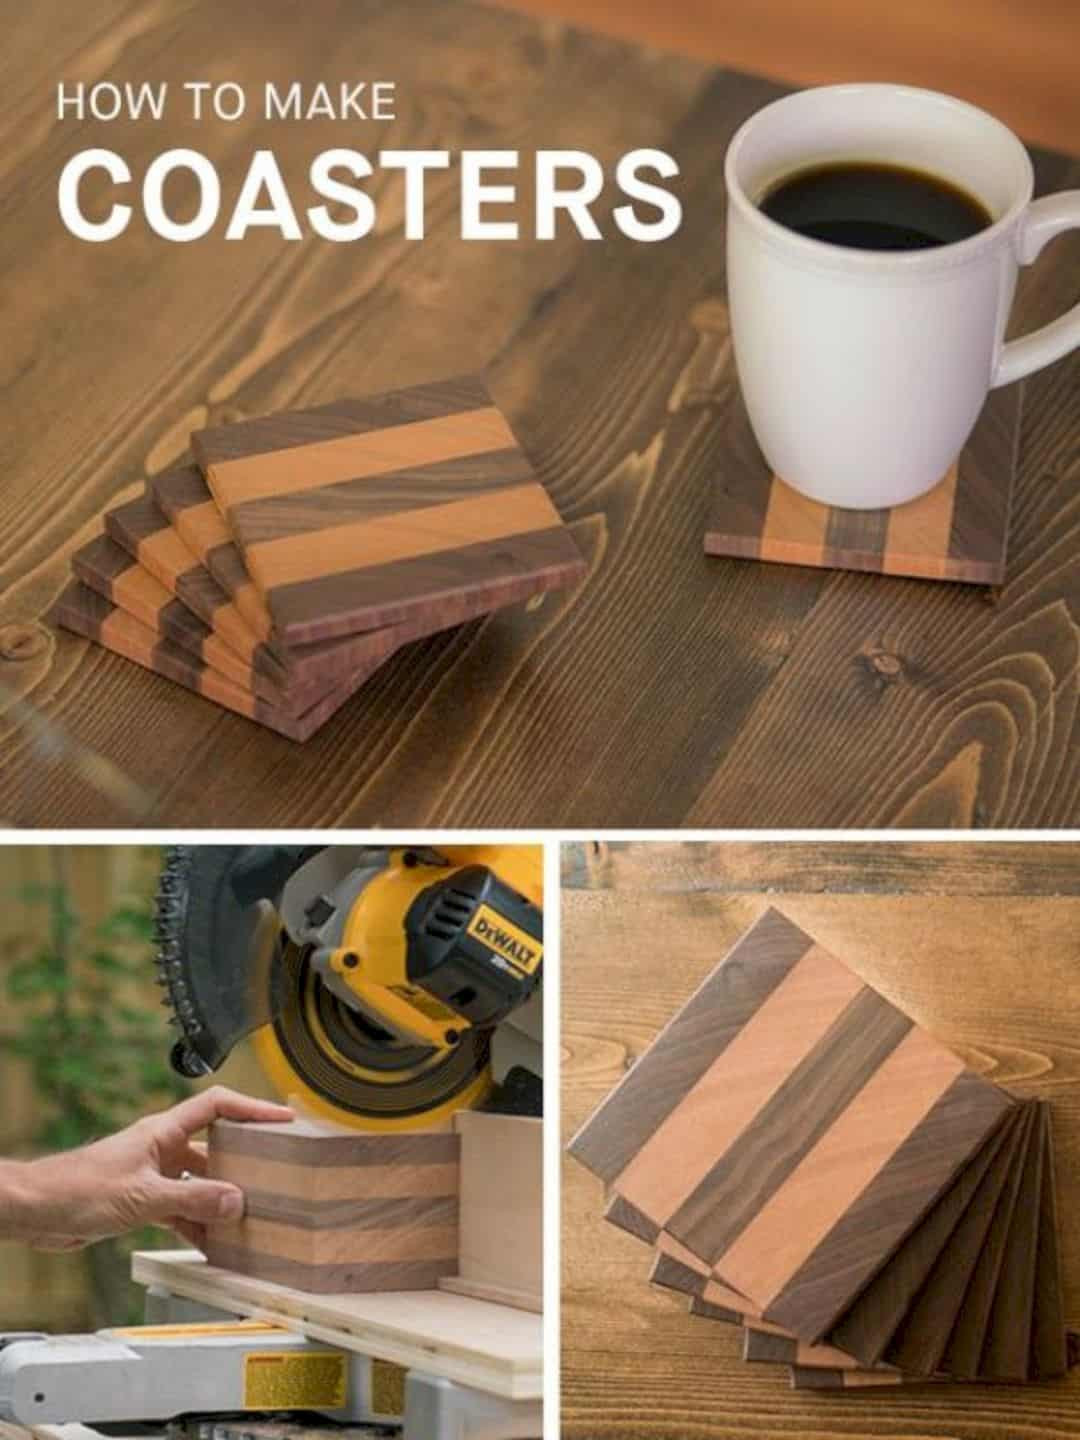 Cool Wood Crafts
 16 Home Decor Ideas with Waste Materials